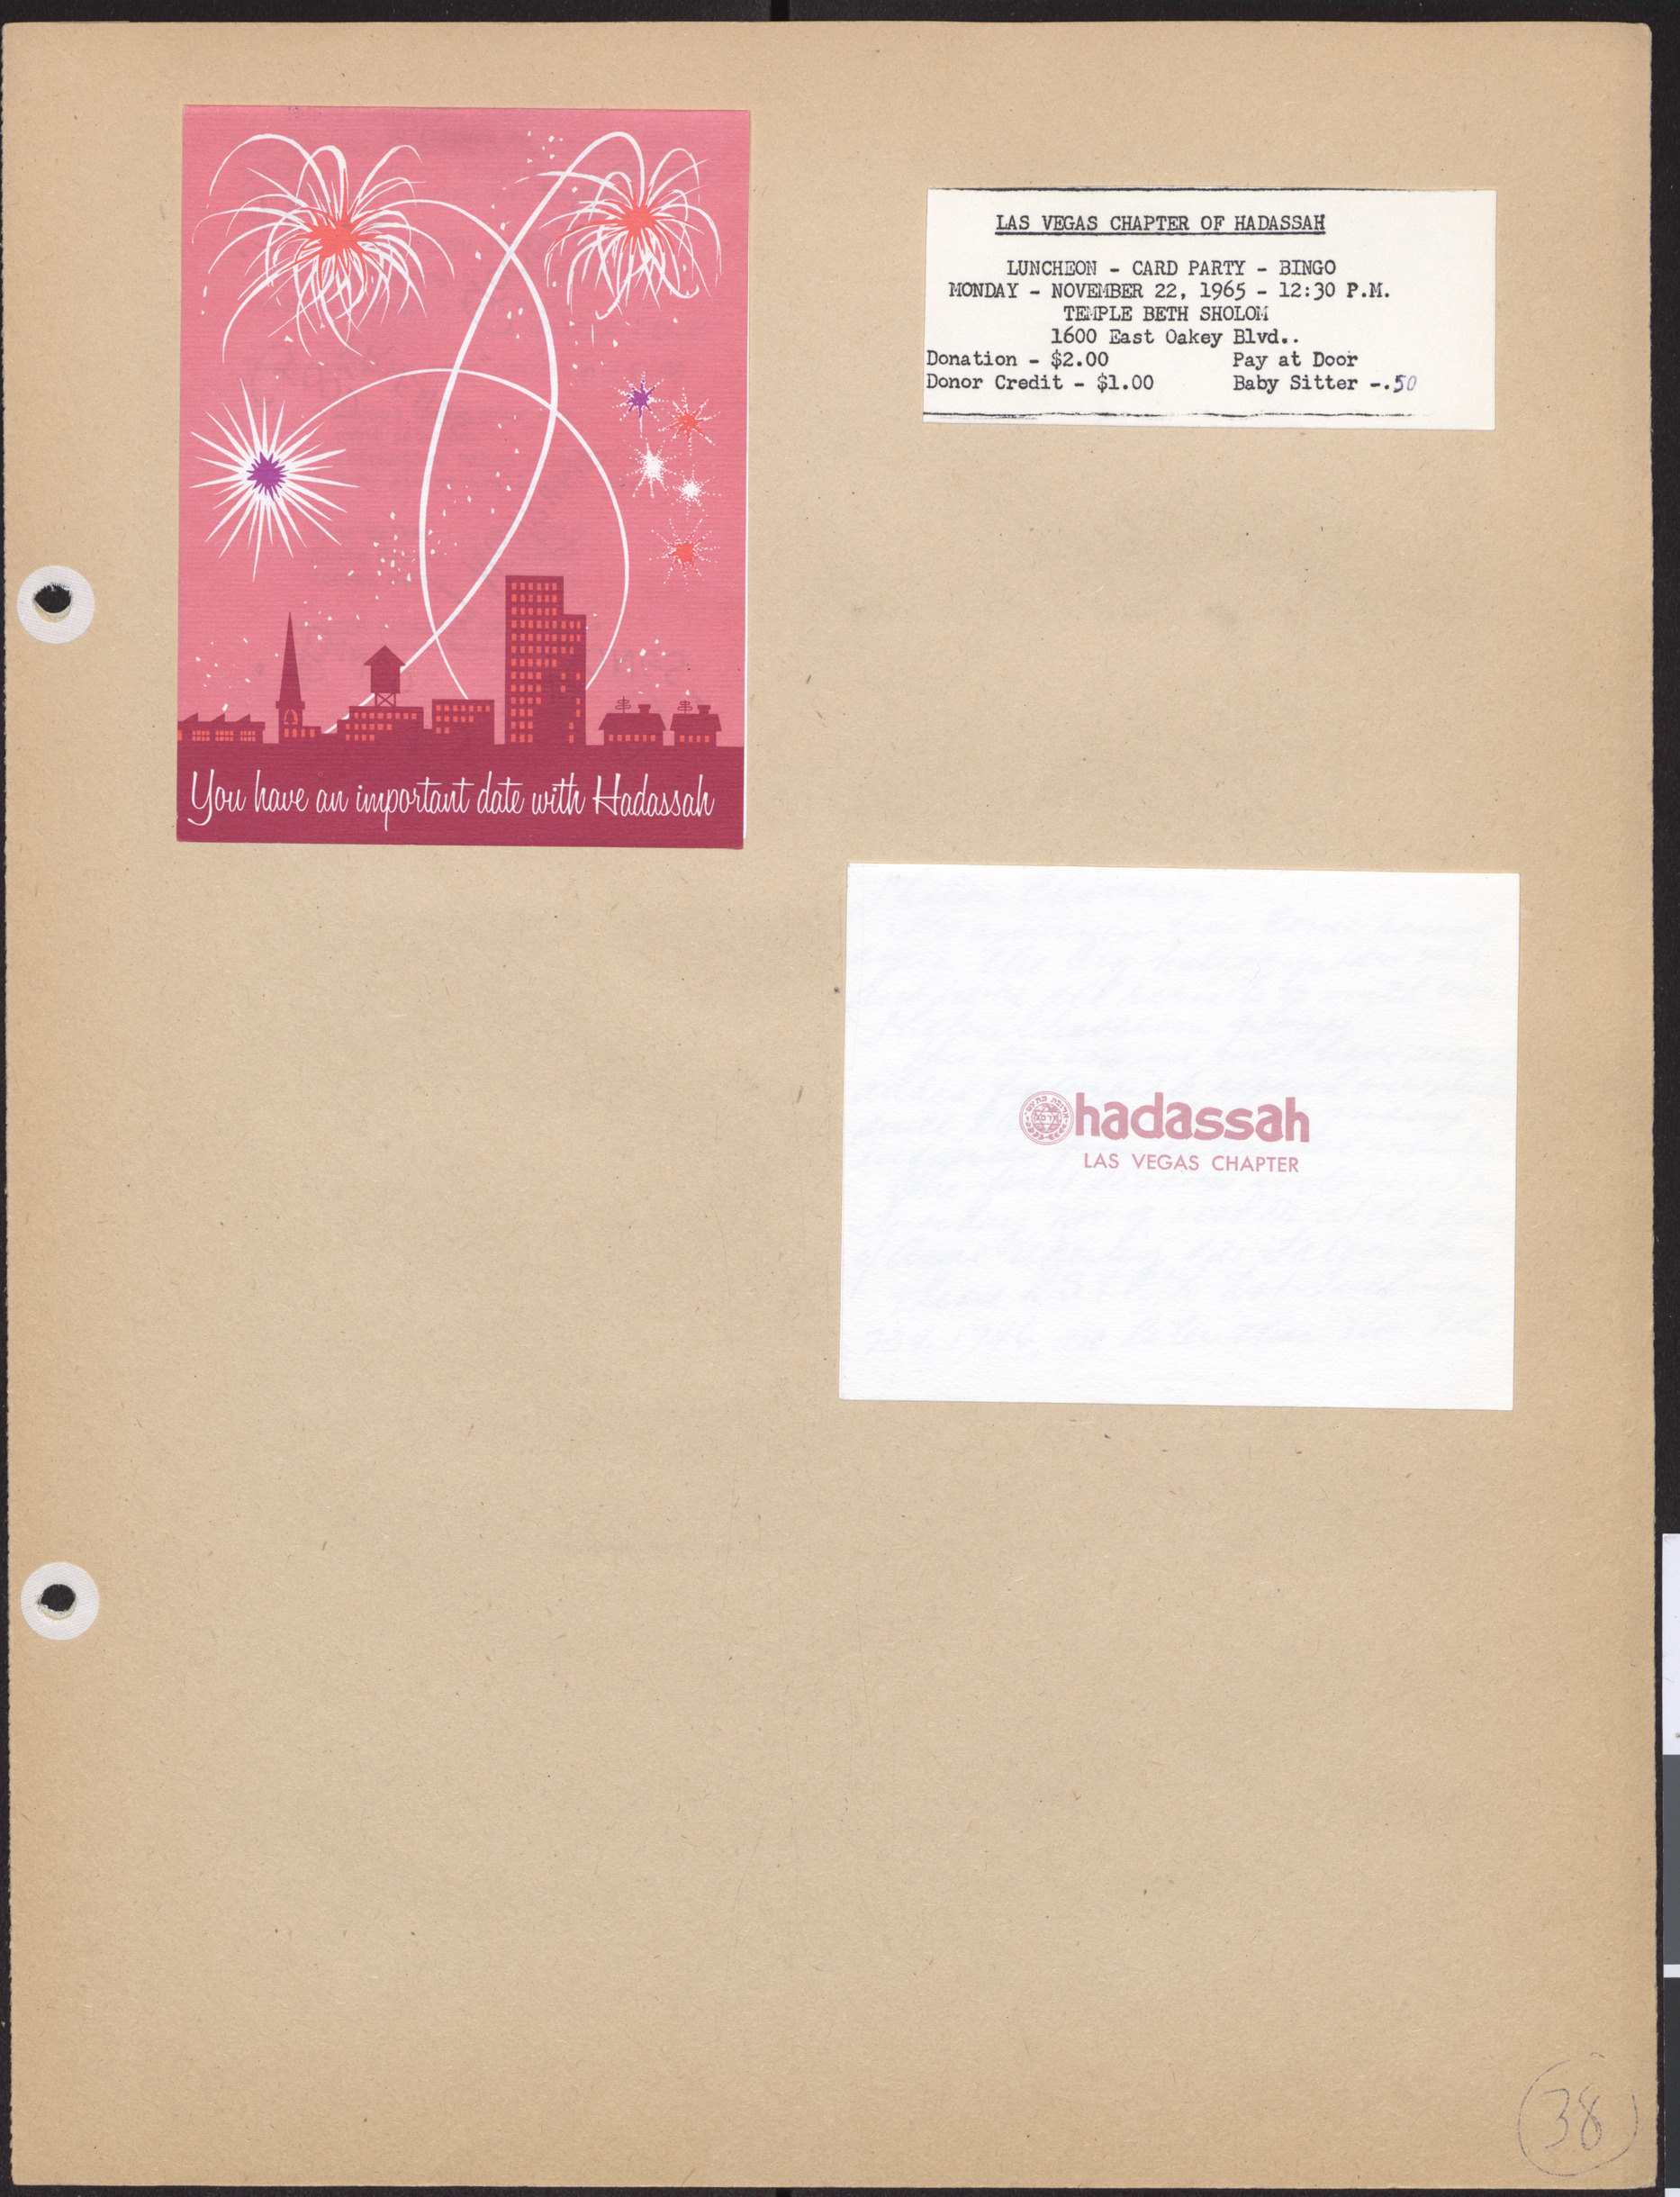 Hadassah notecards and clipping with luncheon announcment